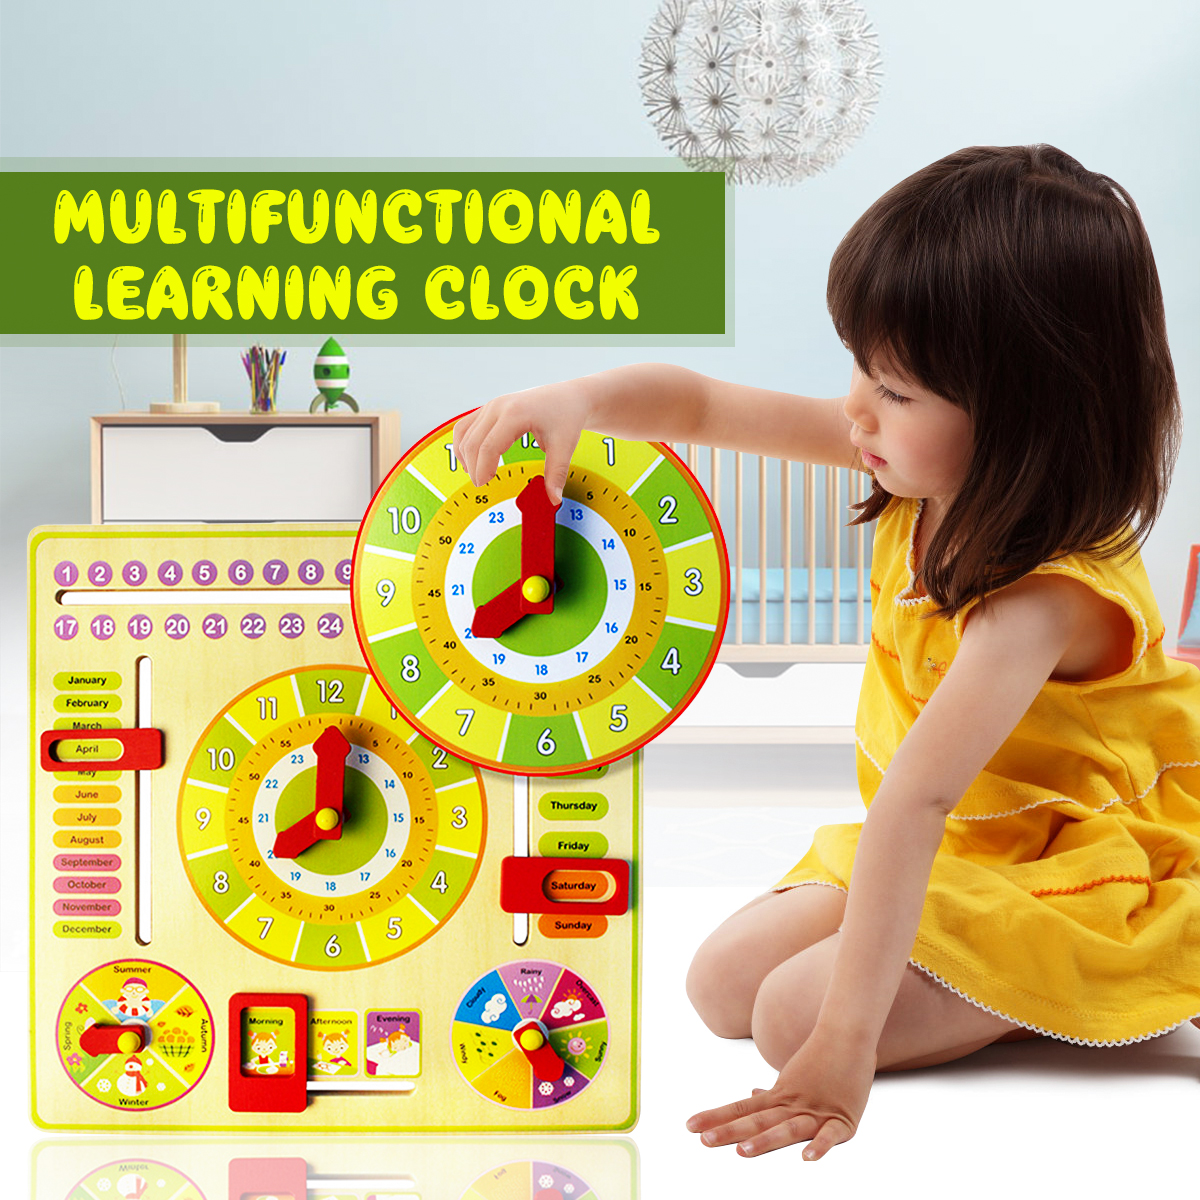 Wooden-Multifunction-Learning-Clock-Toy-Alarm-Calendar-Cognition-Educational-Toys-1550385-1